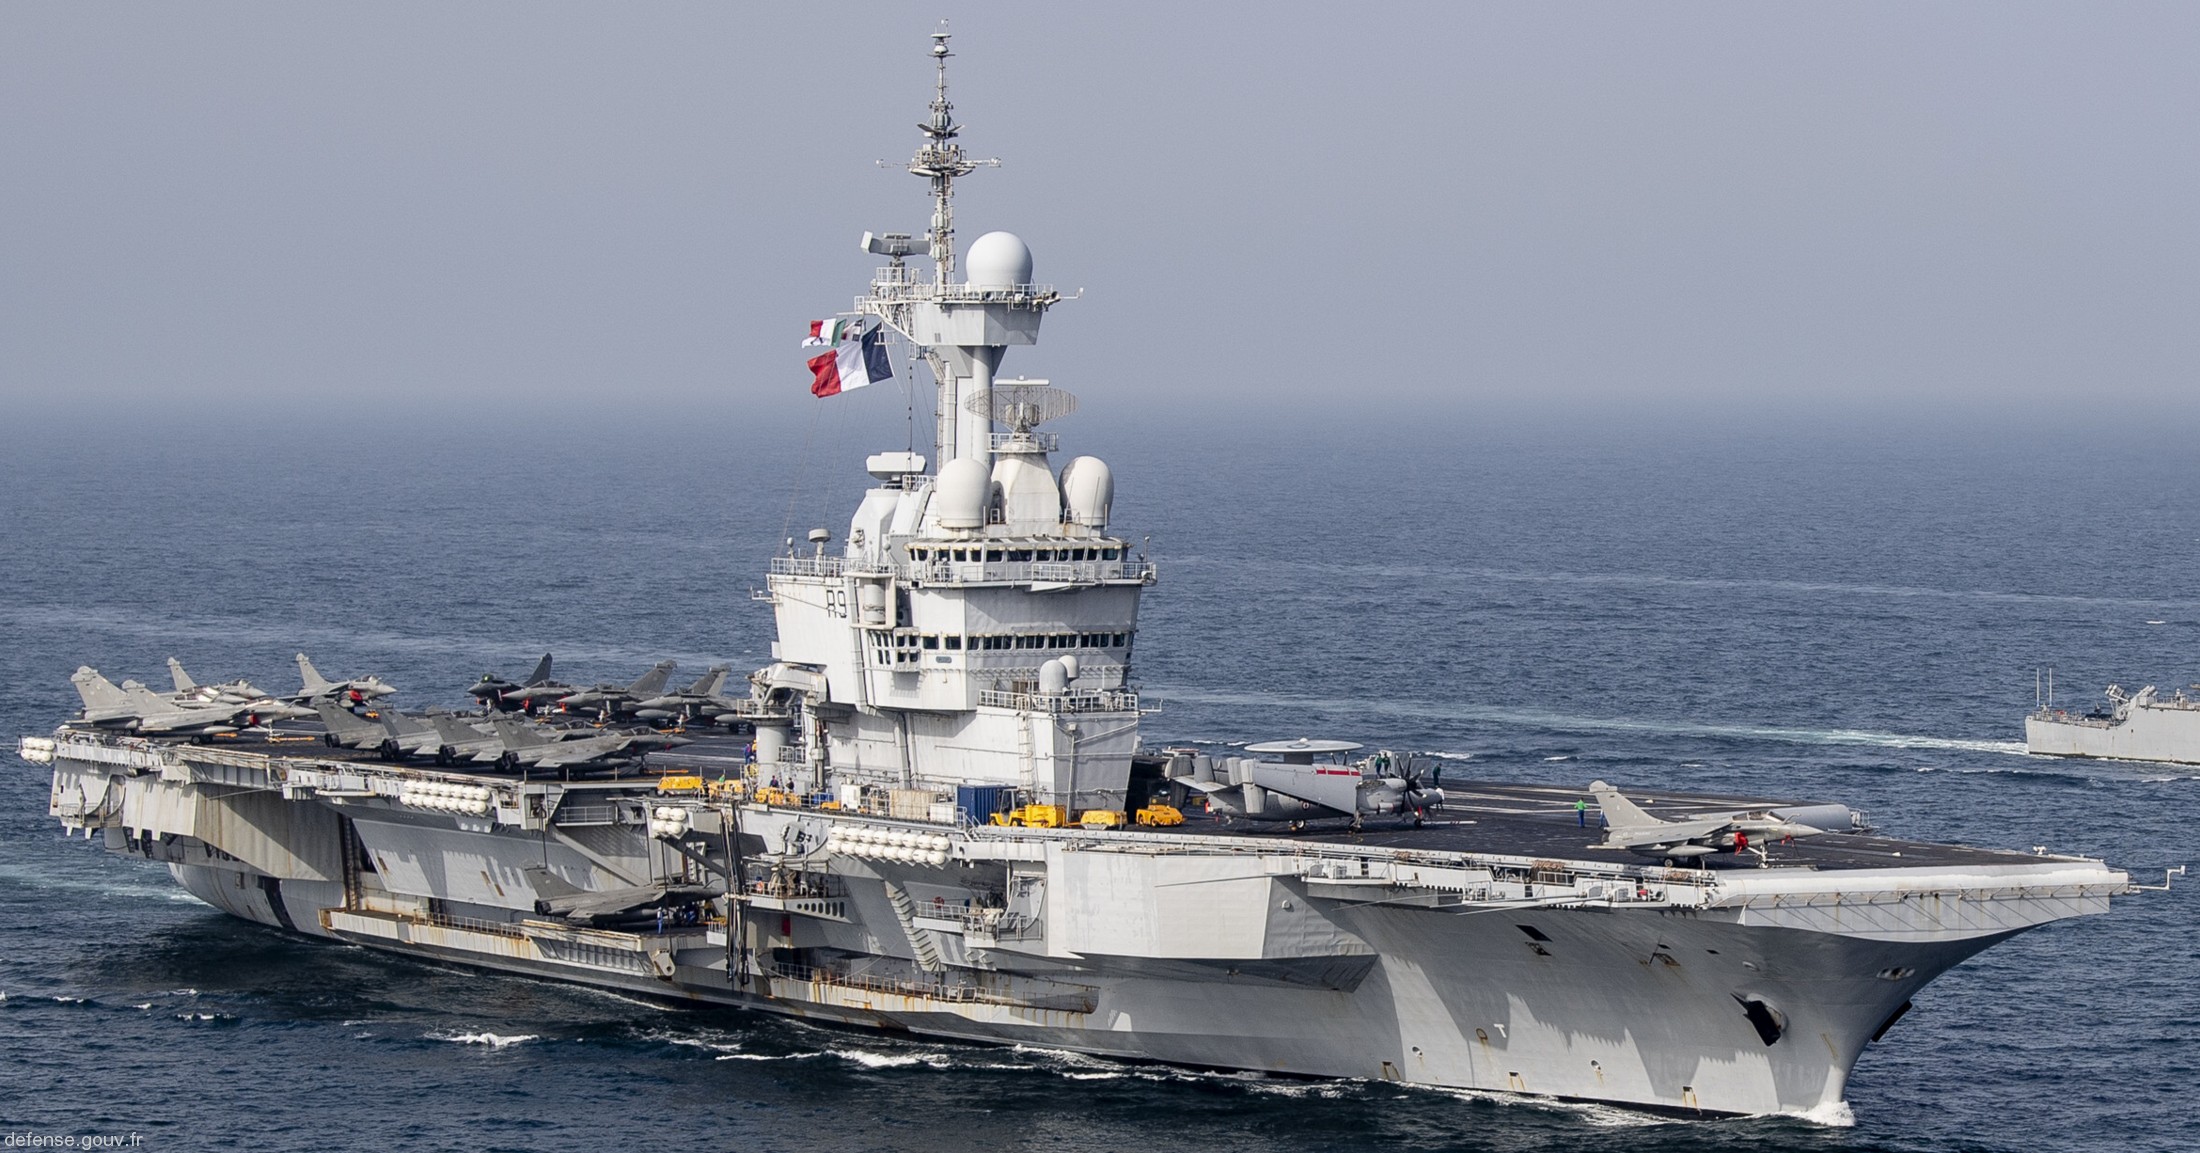 r-91 fs charles de gaulle aircraft carrier french navy porte avions 88